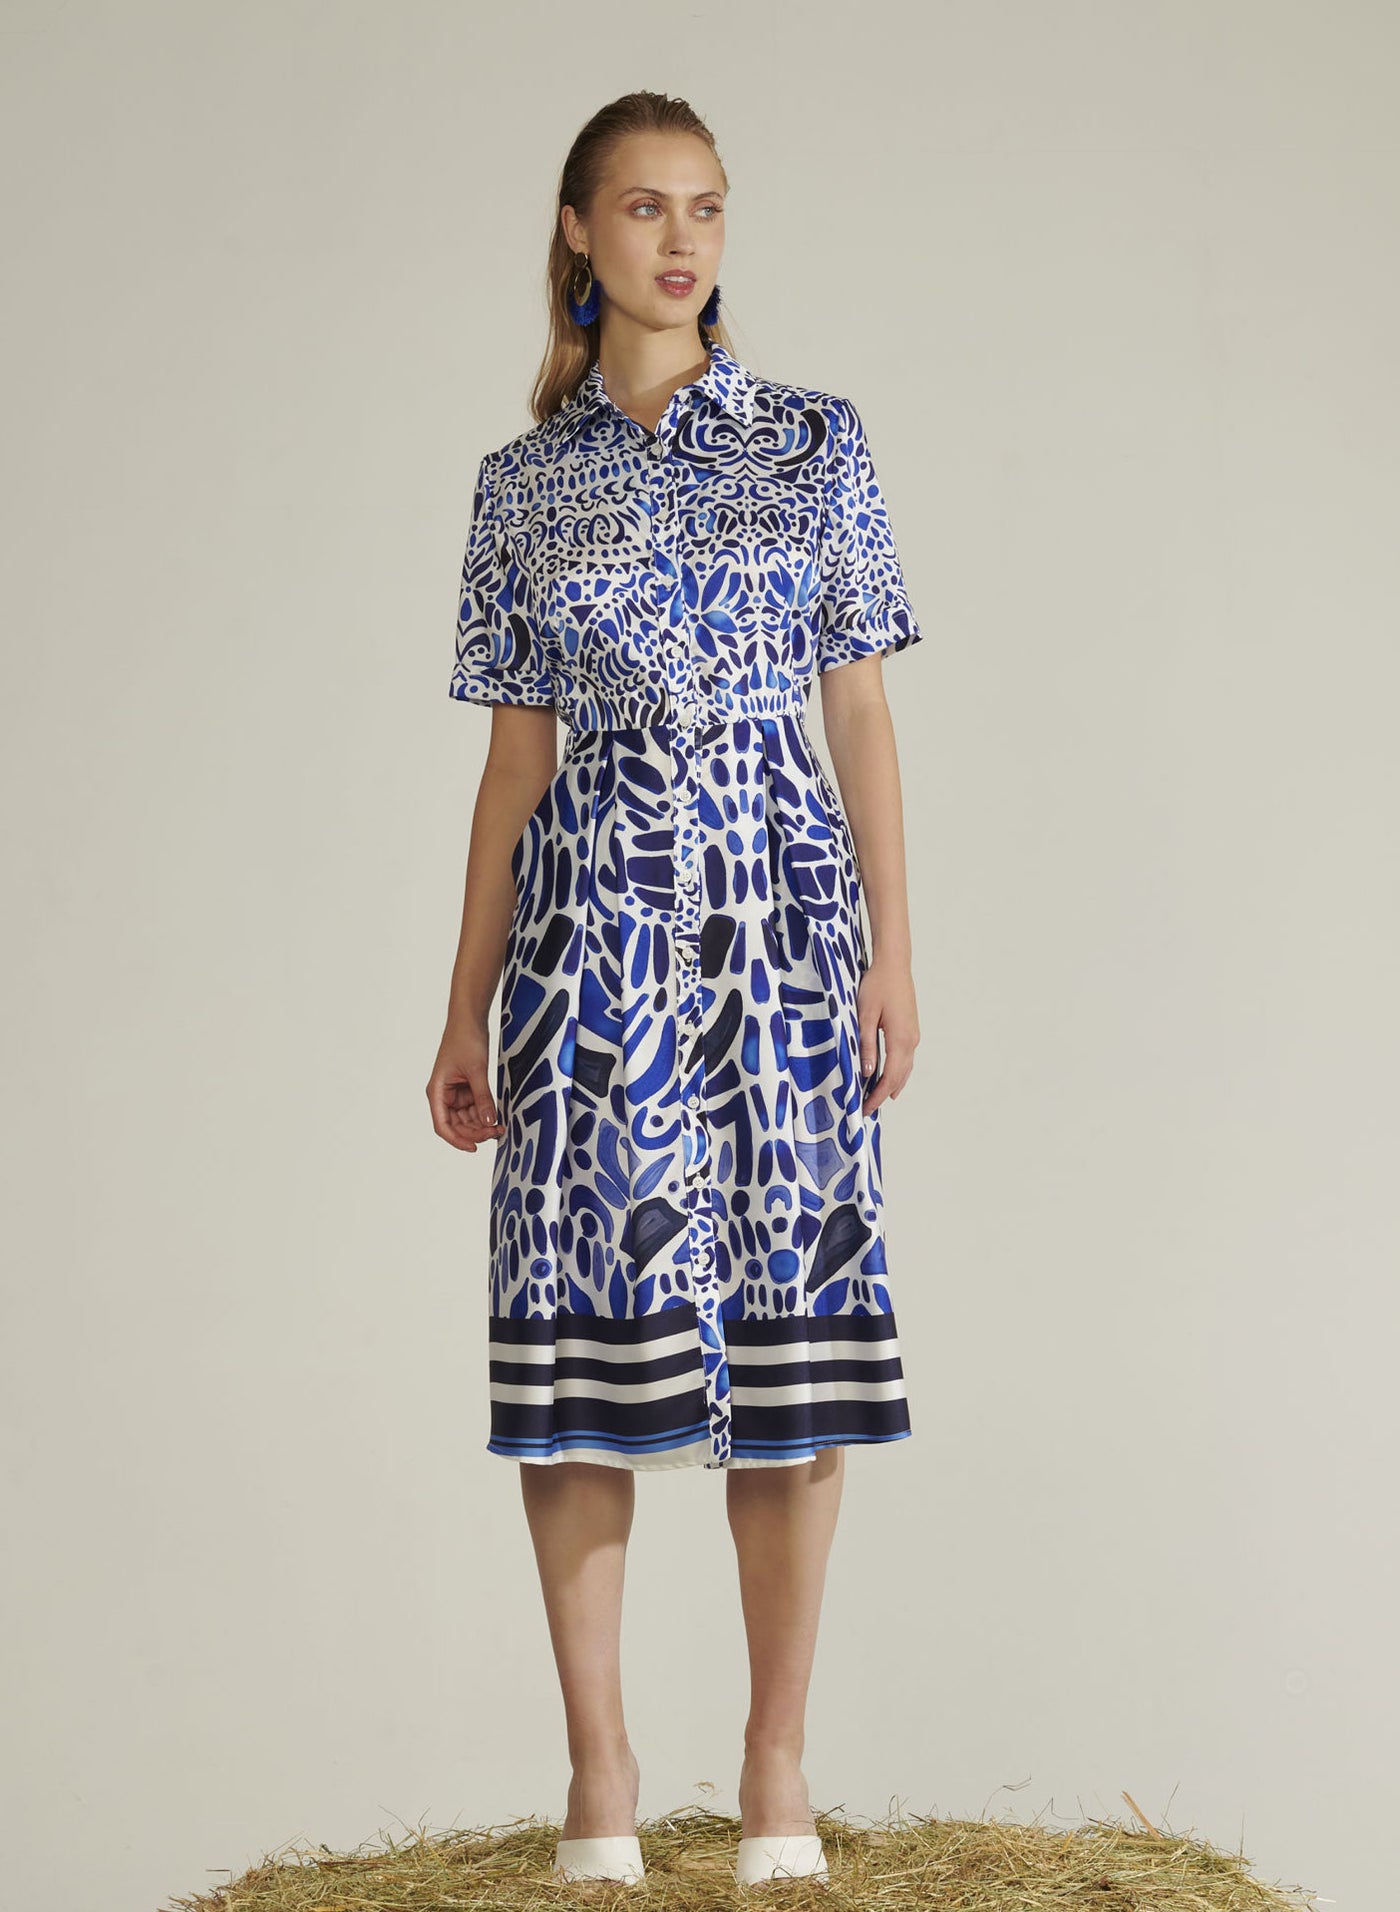 Royal Blue and White Abstract Floral Print Shirt Dress with Pockets